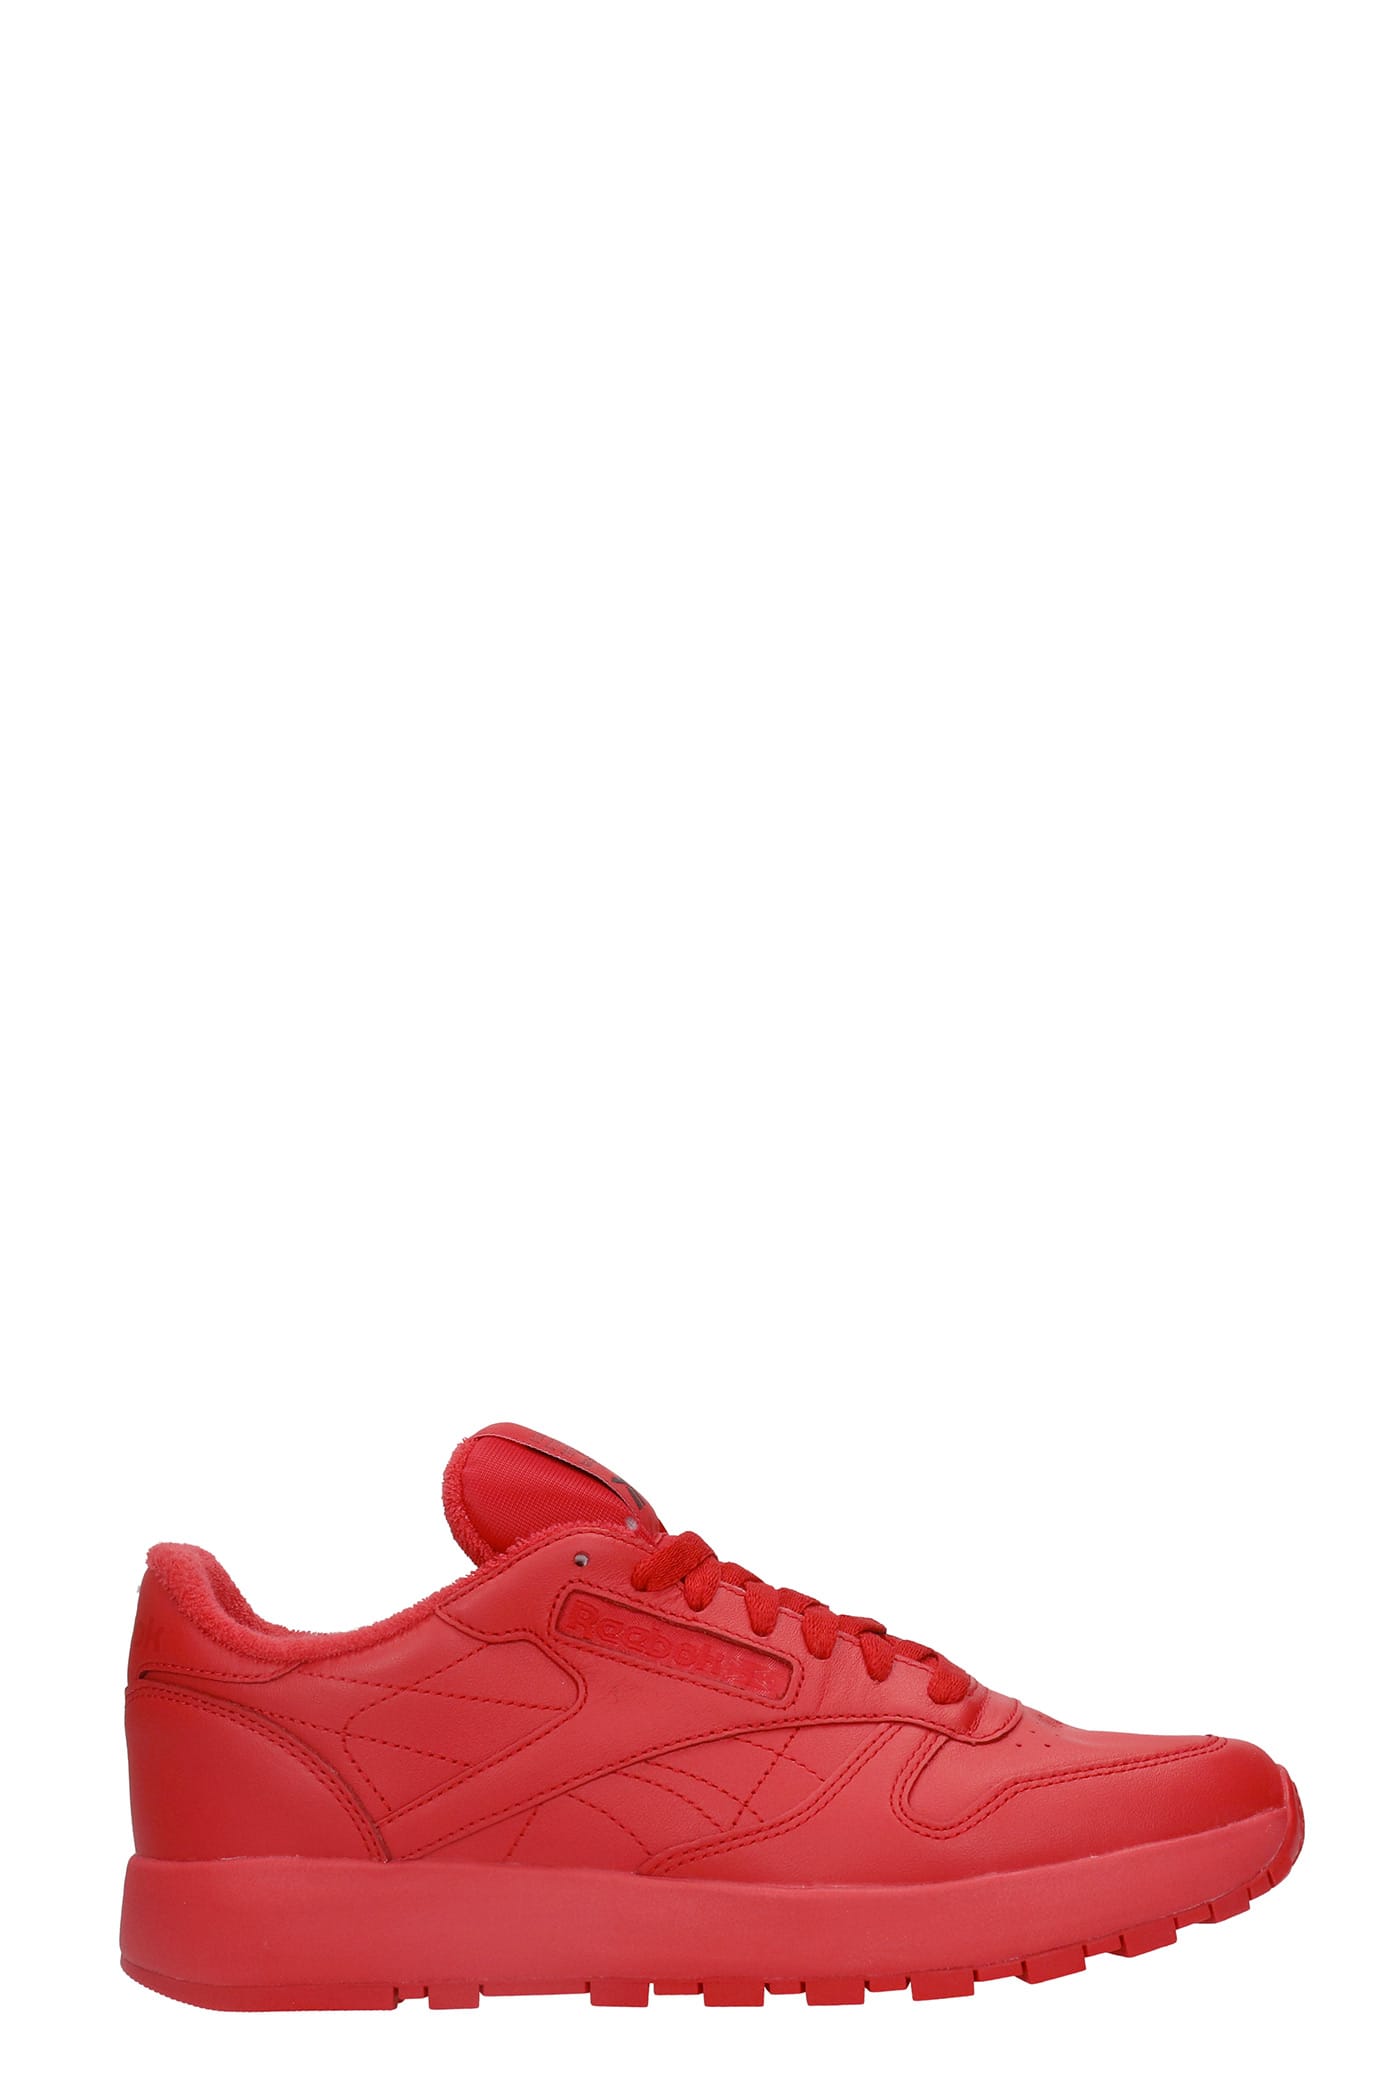 Maison Margiela Sneakers In Red Leather